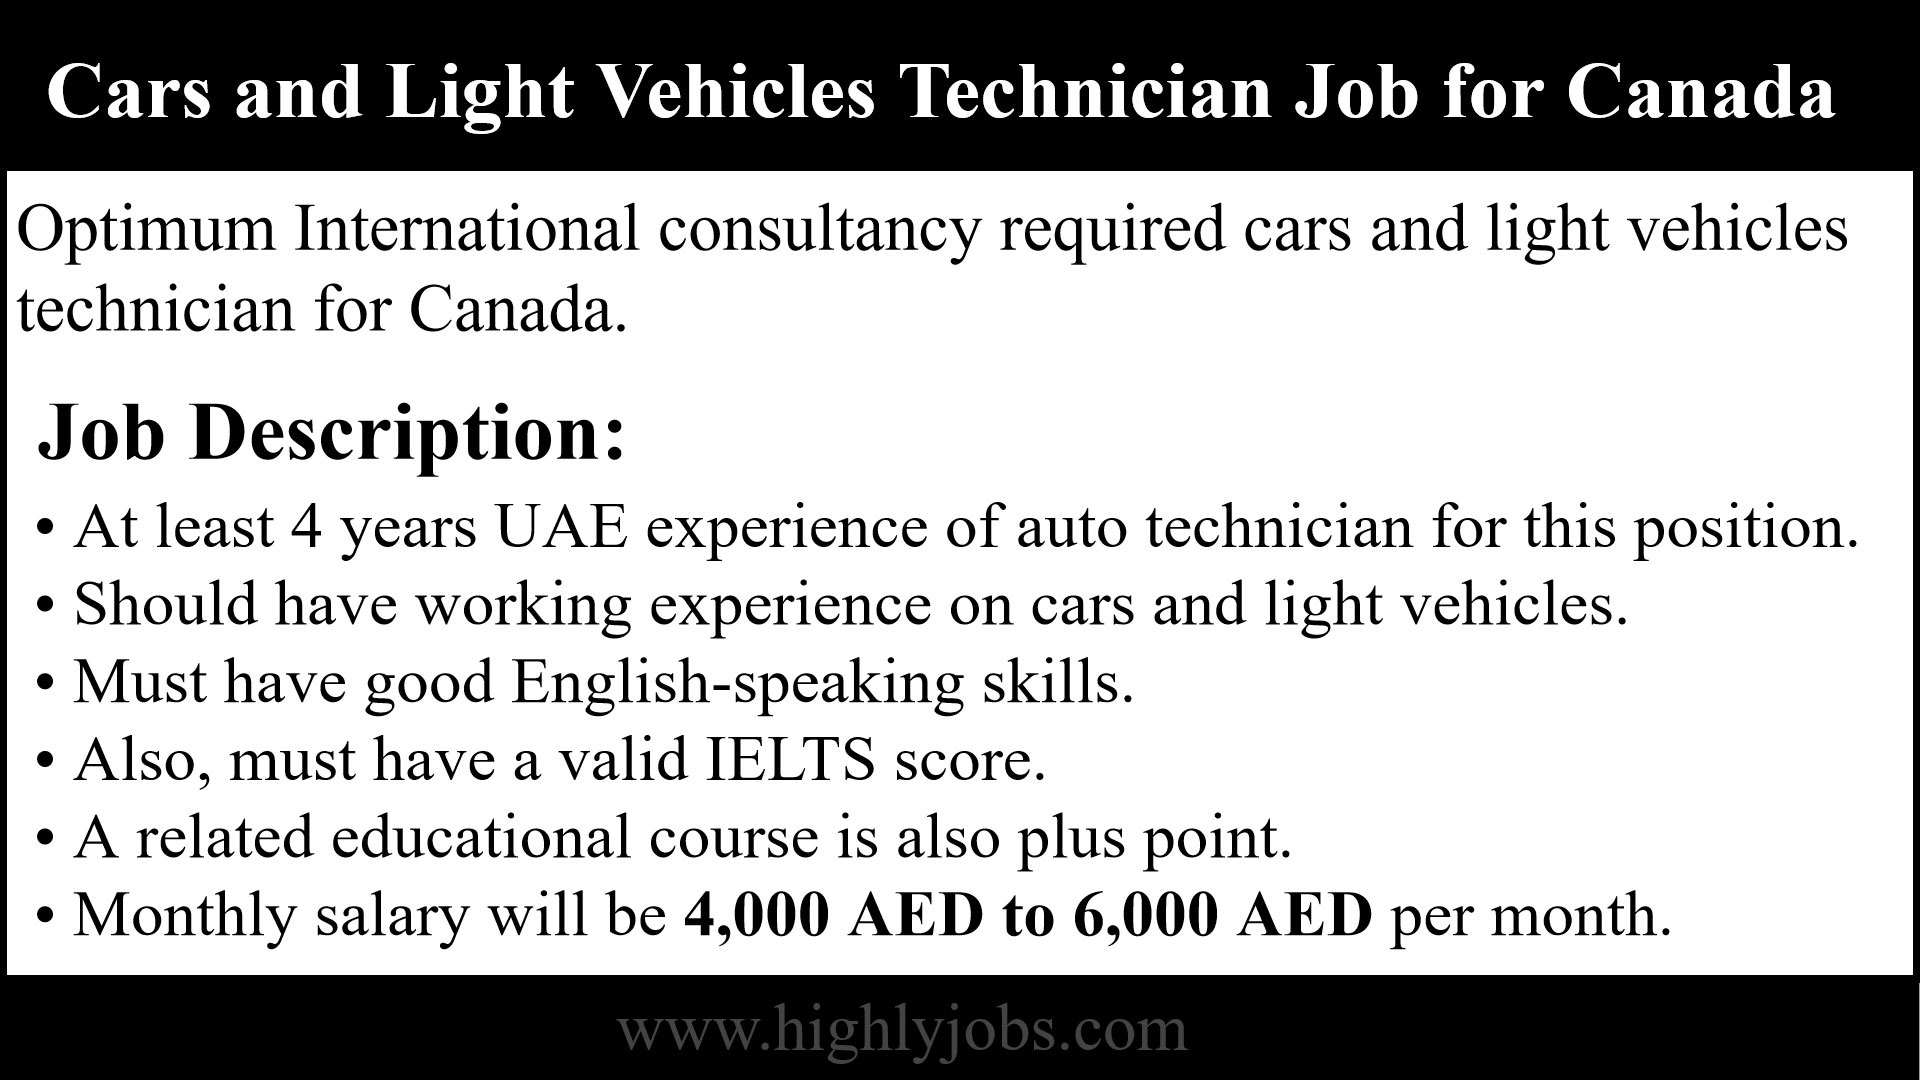 Cars and Light Vehicles Technician Job for Canada